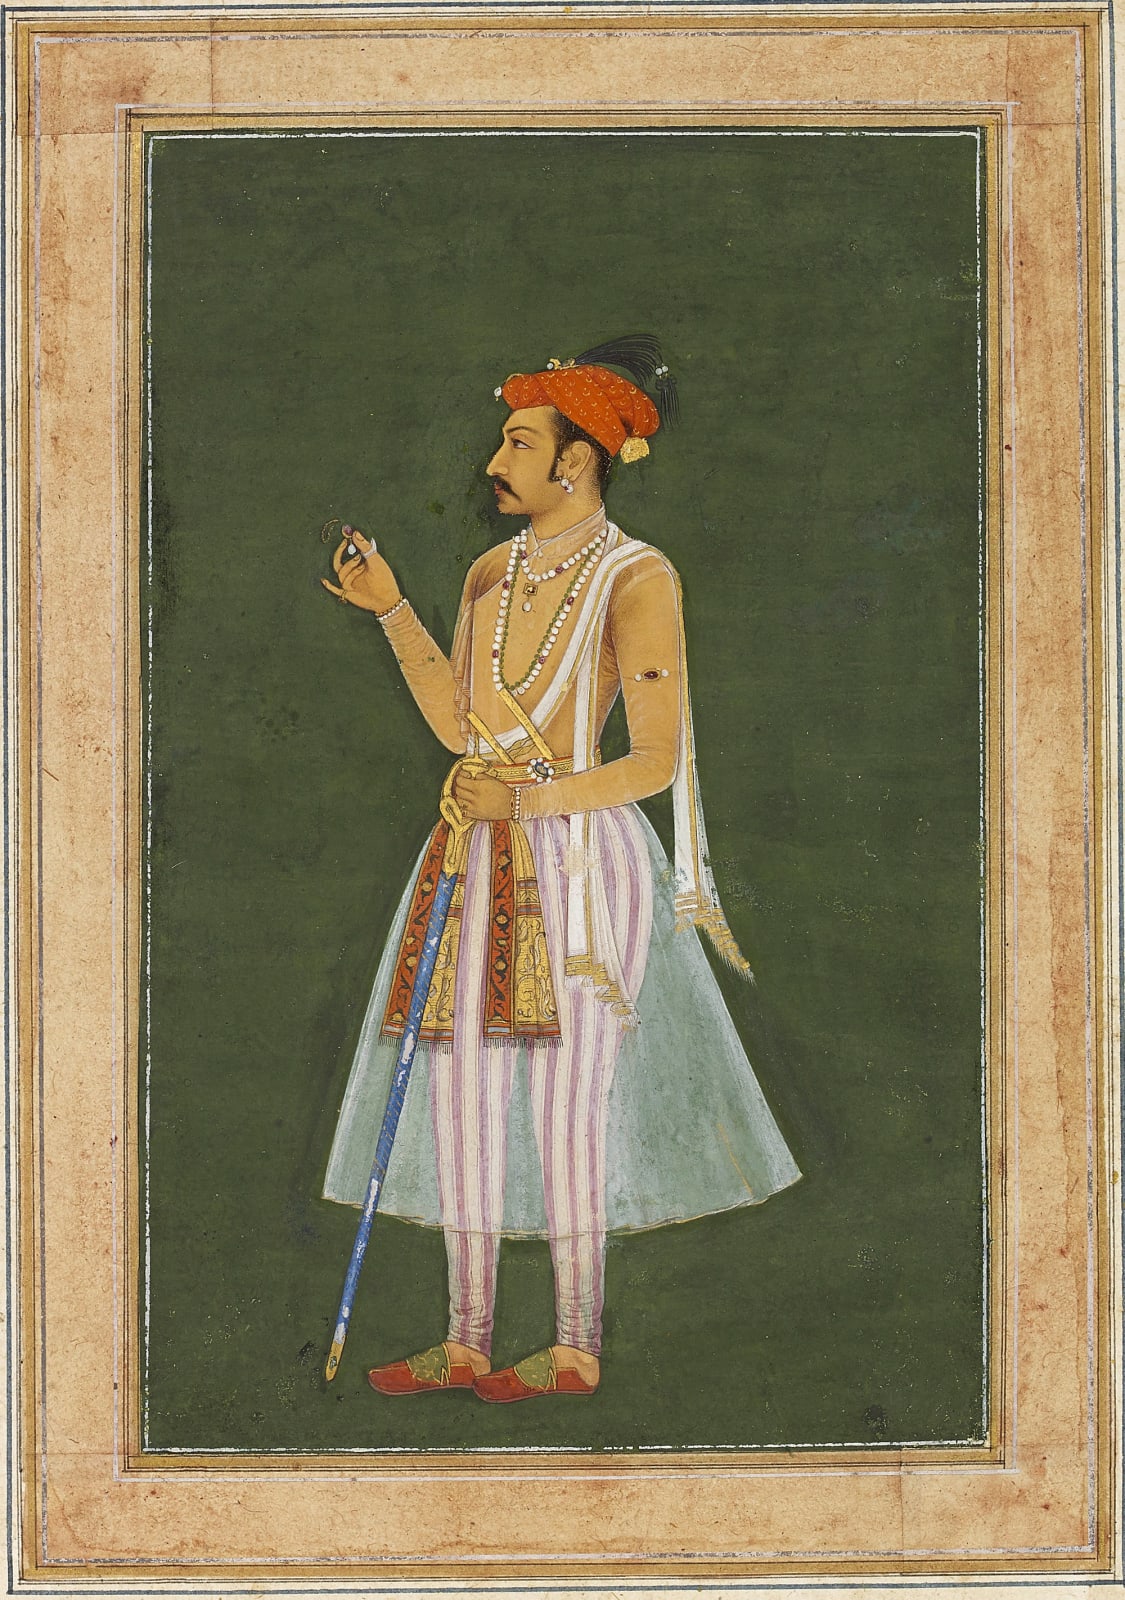 Portrait of Prince Khurram afterwards Shah Jahan aged about 20, Mughal, c. 1612-15; Inscribed on verso no 30 on verso in an 18th century hand